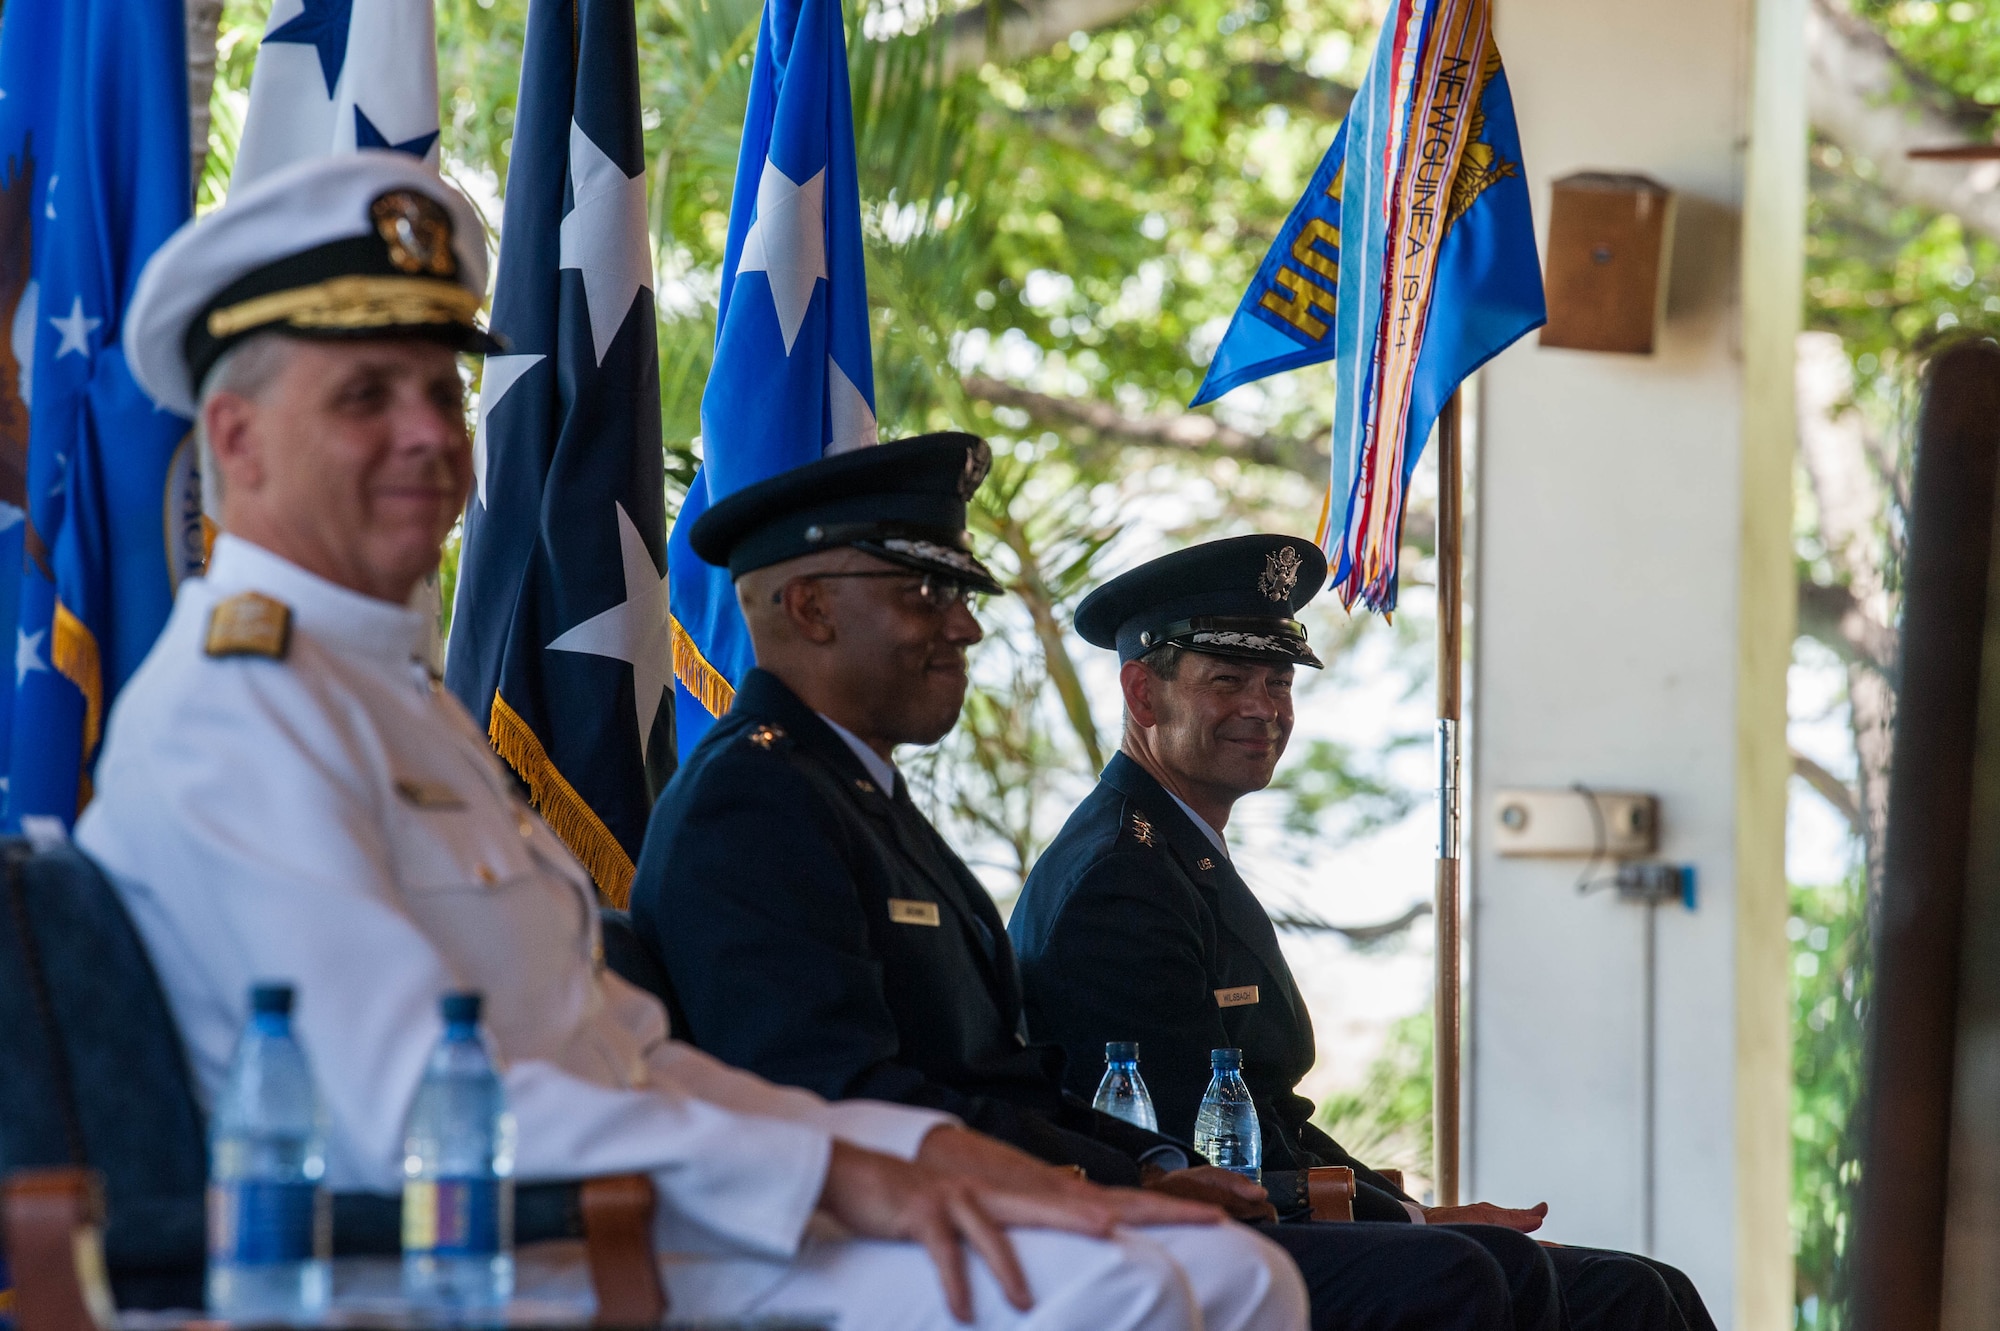 Gen. Kenneth S. Wilsbach (right), Gen. CQ Brown, Jr., and Adm. Philip Davidson, Commander of U.S. Indo-Pacific Command listen as Gen. David L. Goldfein, Chief of Staff of the Air Force, gives his remarks during the Pacific Air Forces’ Change of Command Ceremony on Joint Base Pearl Harbor-Hickam, Hawaii, July 8, 2020. PACAF’s area of responsibility is home to 60 percent of the world’s population in 36 nations spread across 53 percent of the Earth’s surface and 16 time zones, with more than 1,000 spoken languages. (U.S. Air Force photo by Staff Sgt. Hailey Haux)